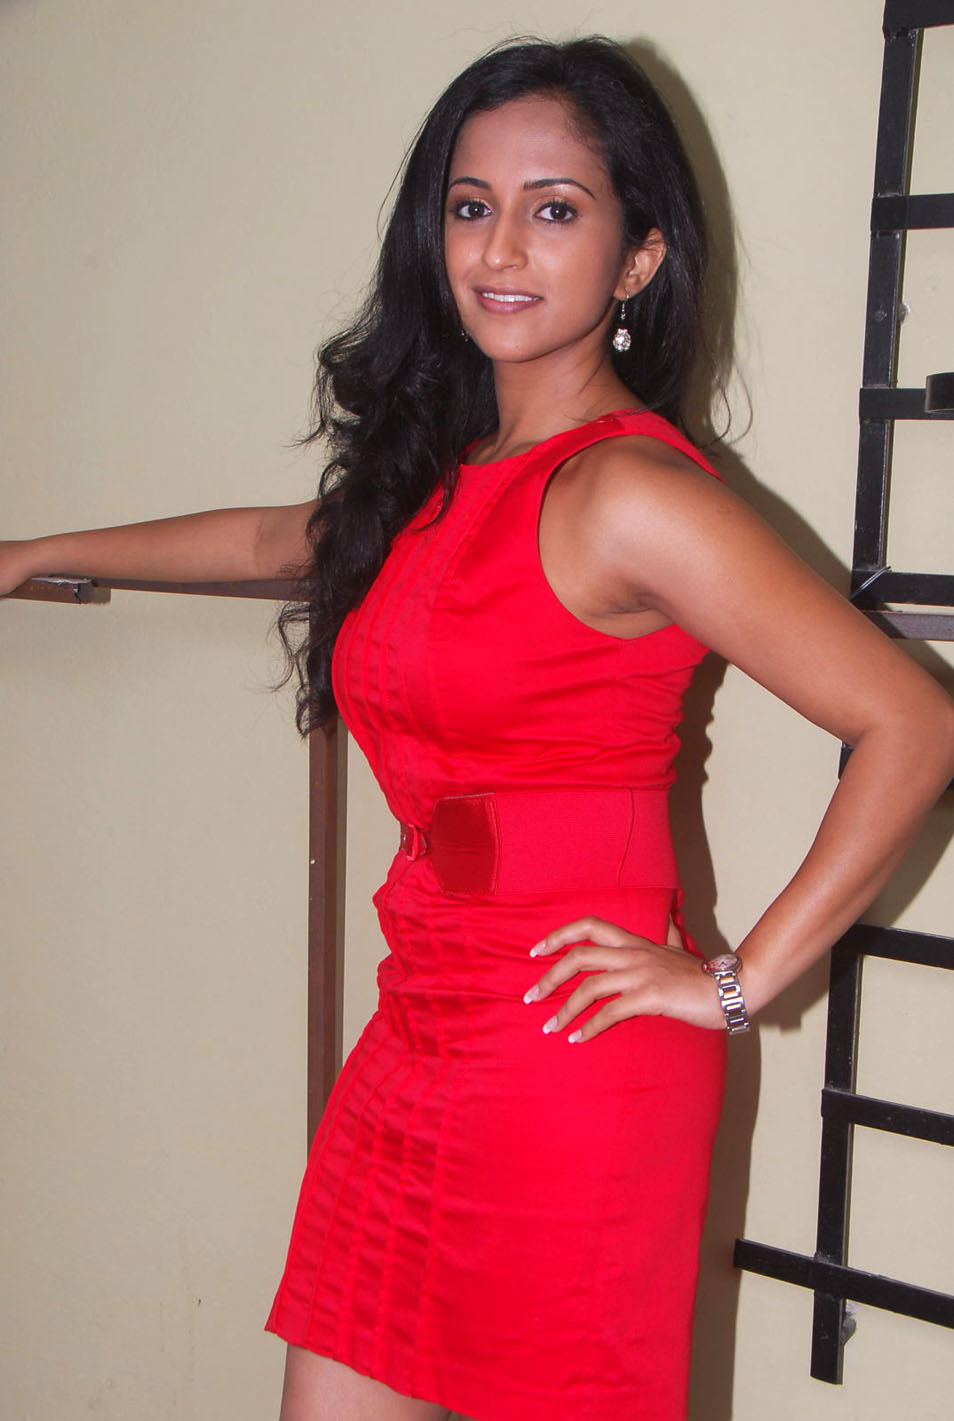 Asheeka hot pictures | Picture 45263